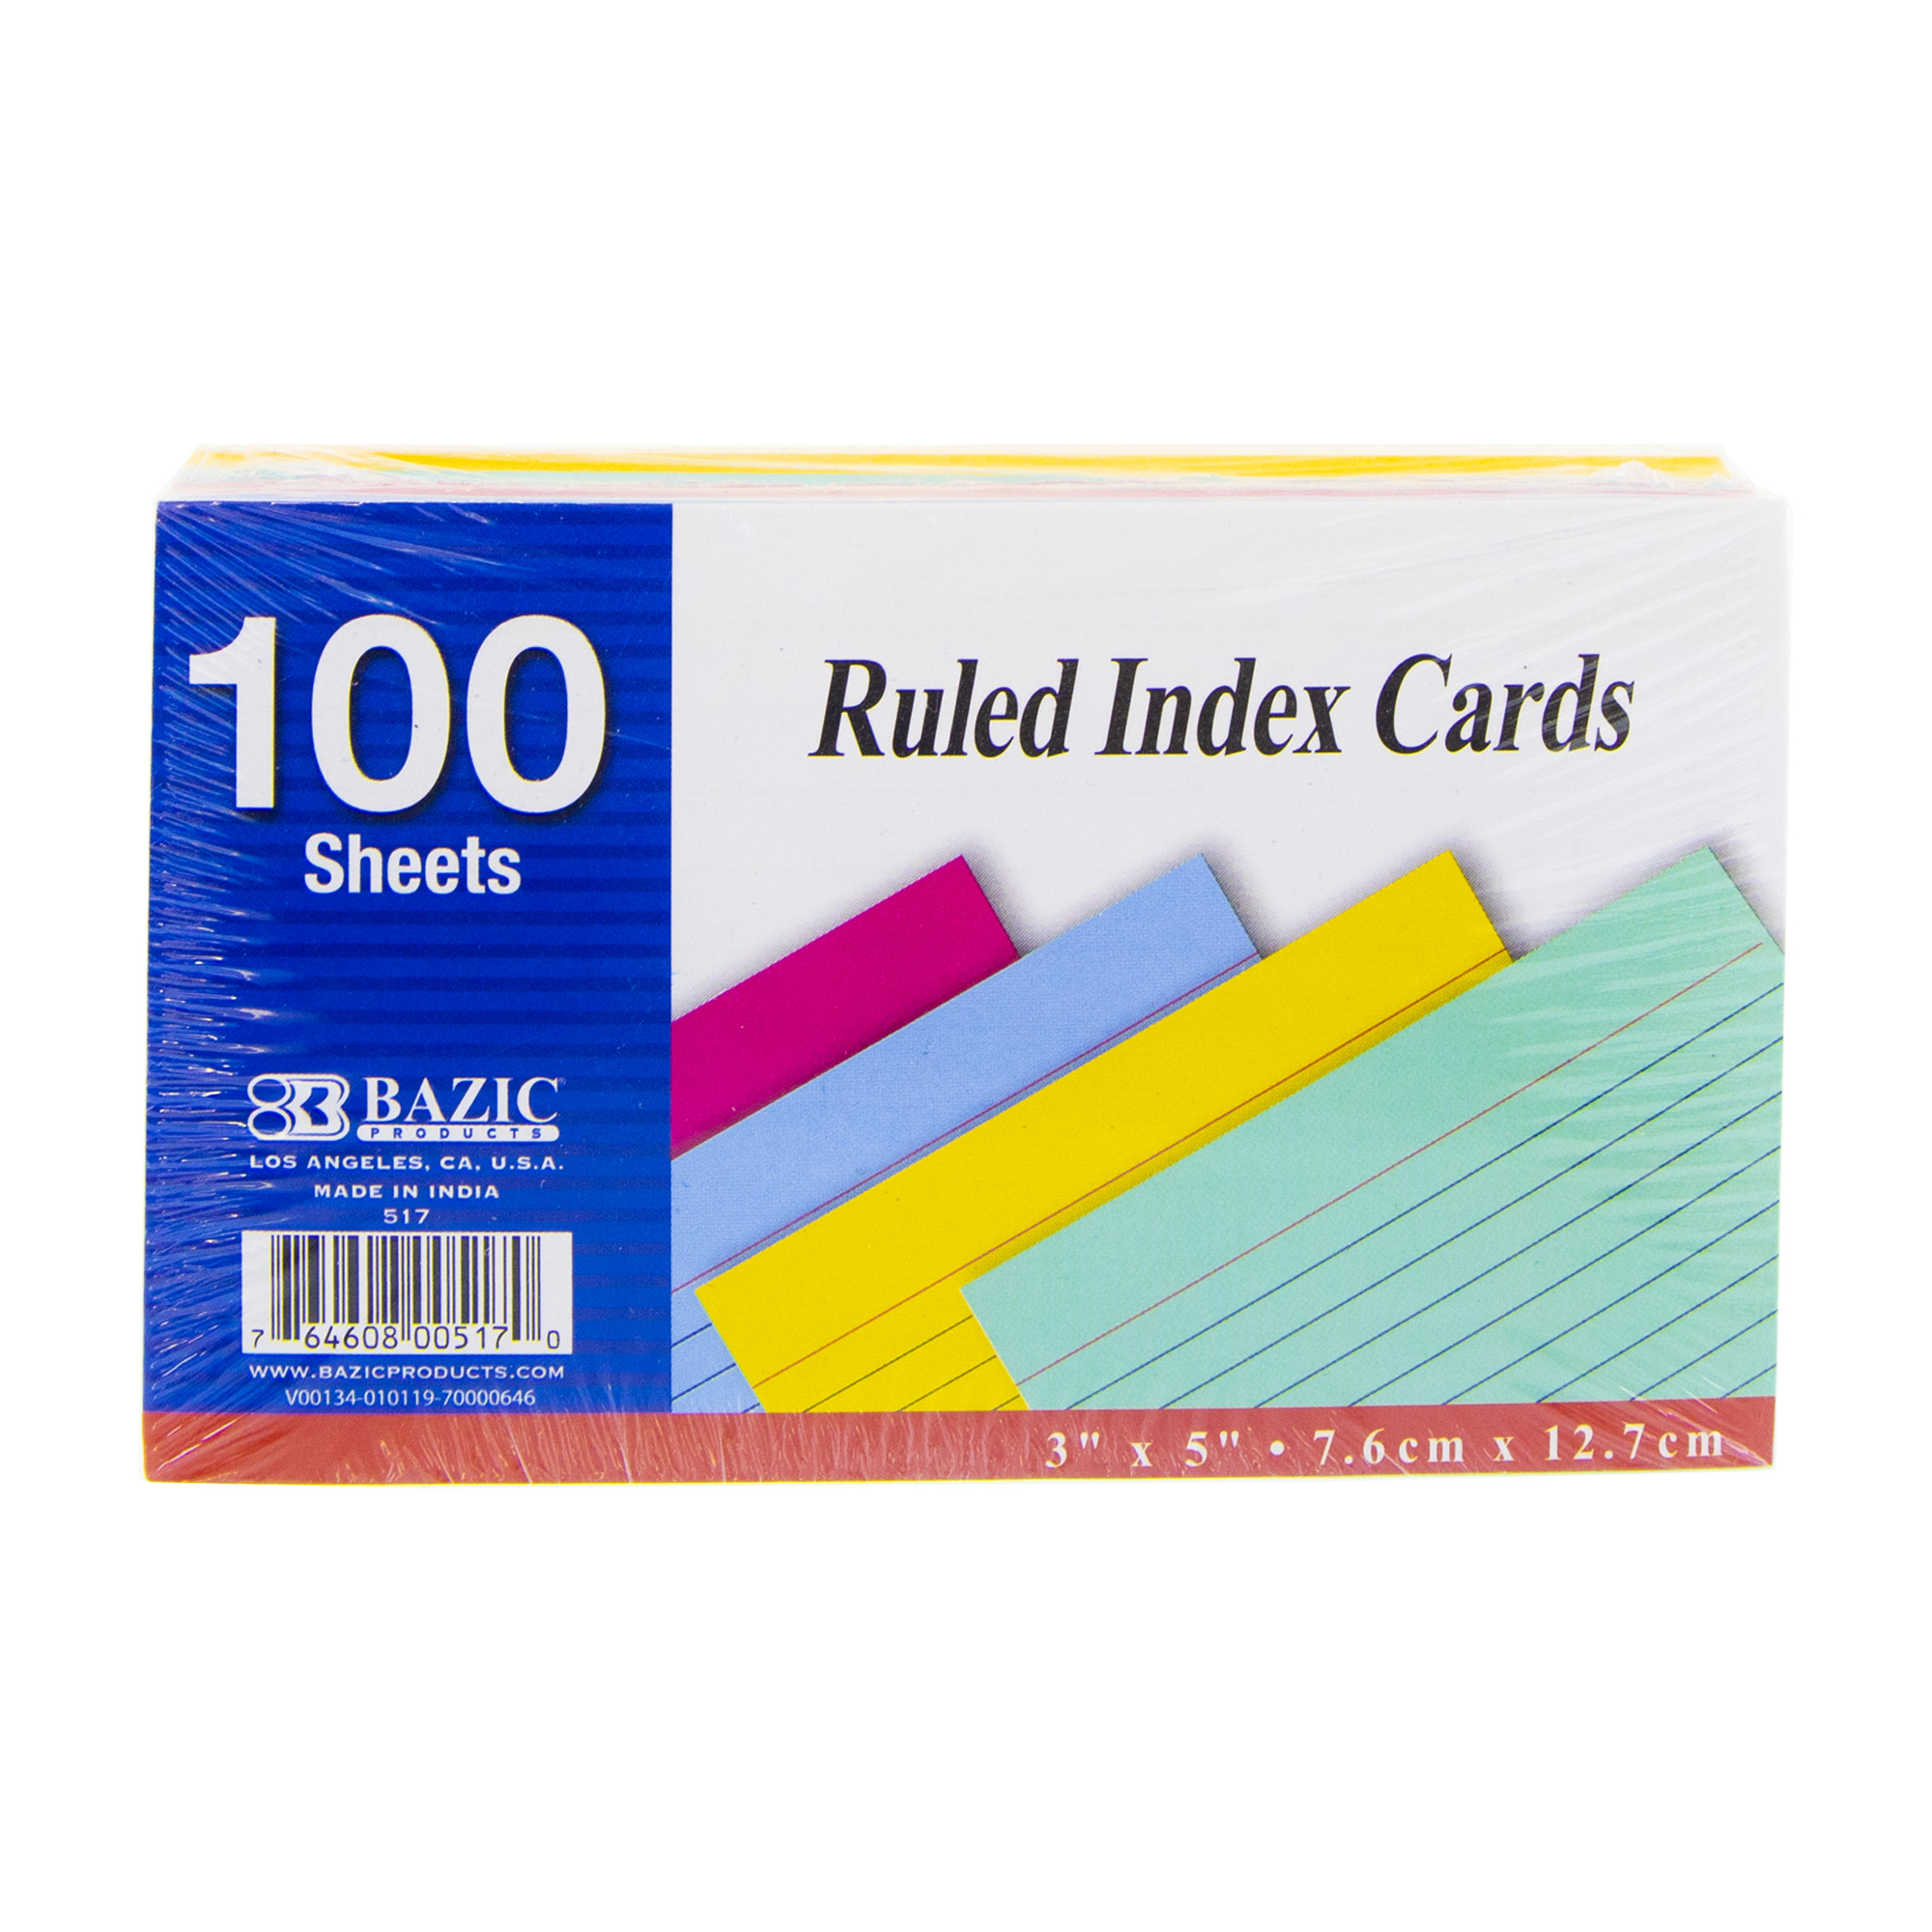 Index Card Photos and Images & Pictures